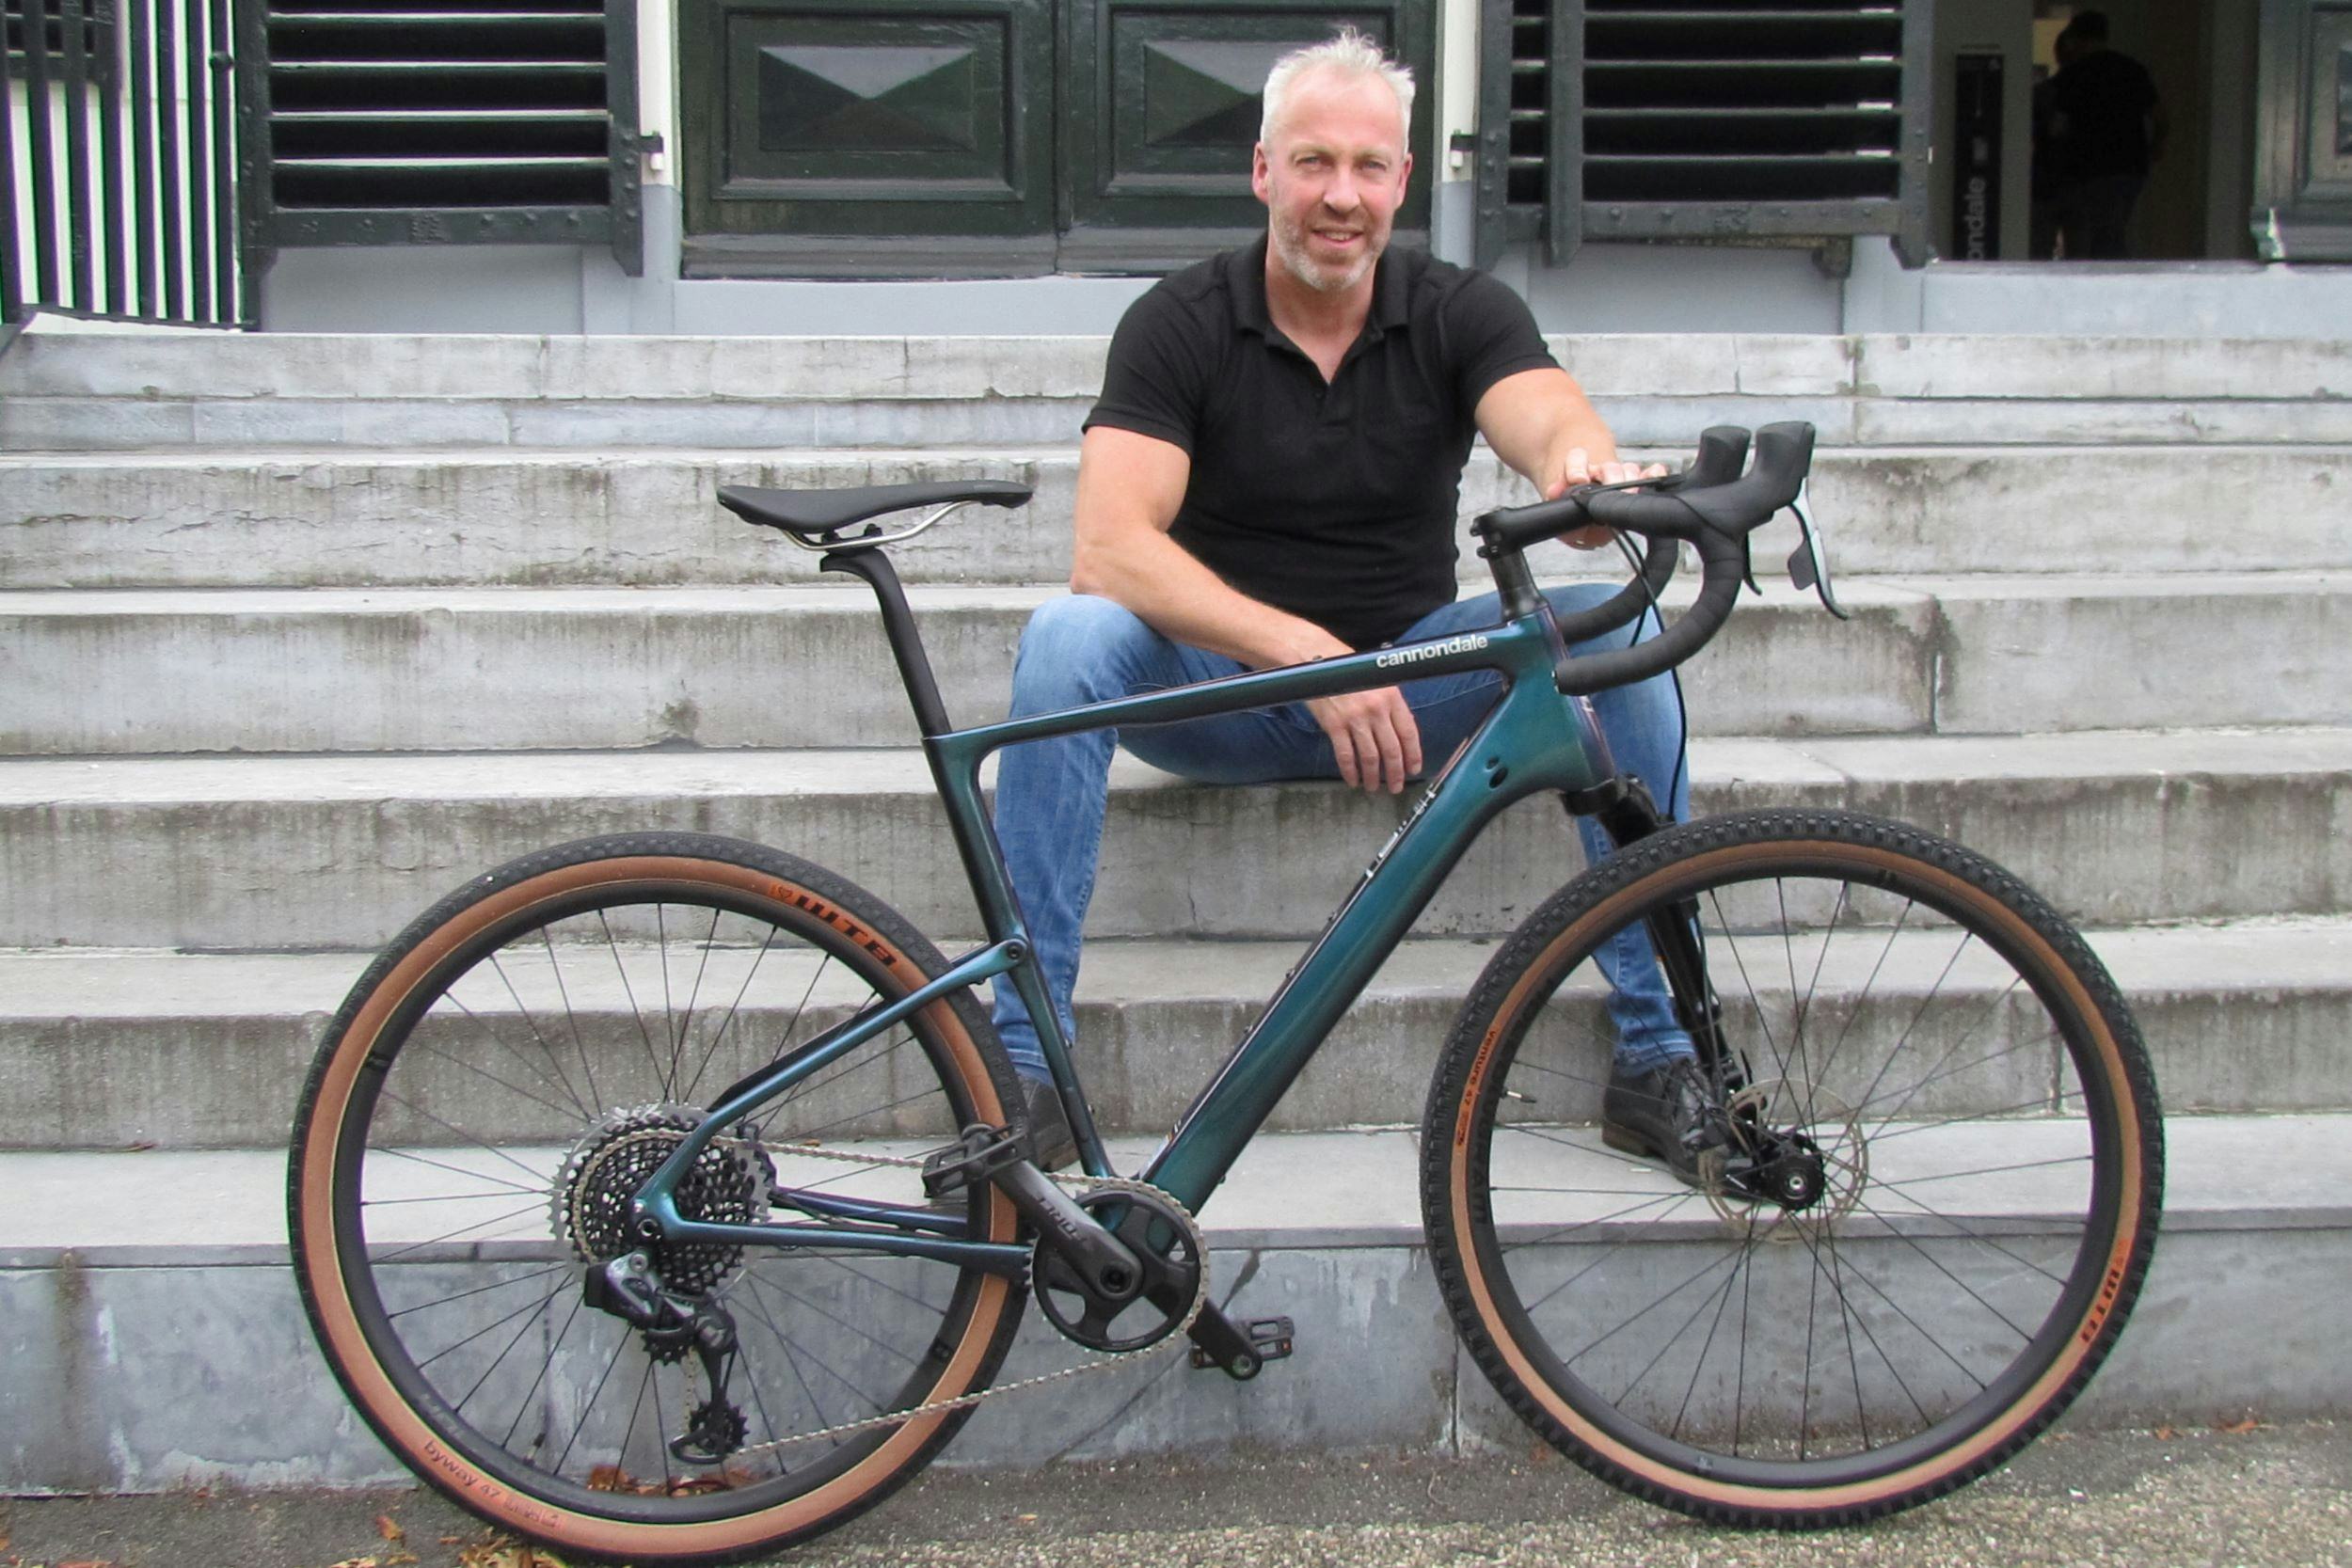  Eugene Fierkens is a man on a mission at CSG Europe. – Photo Bike Europe